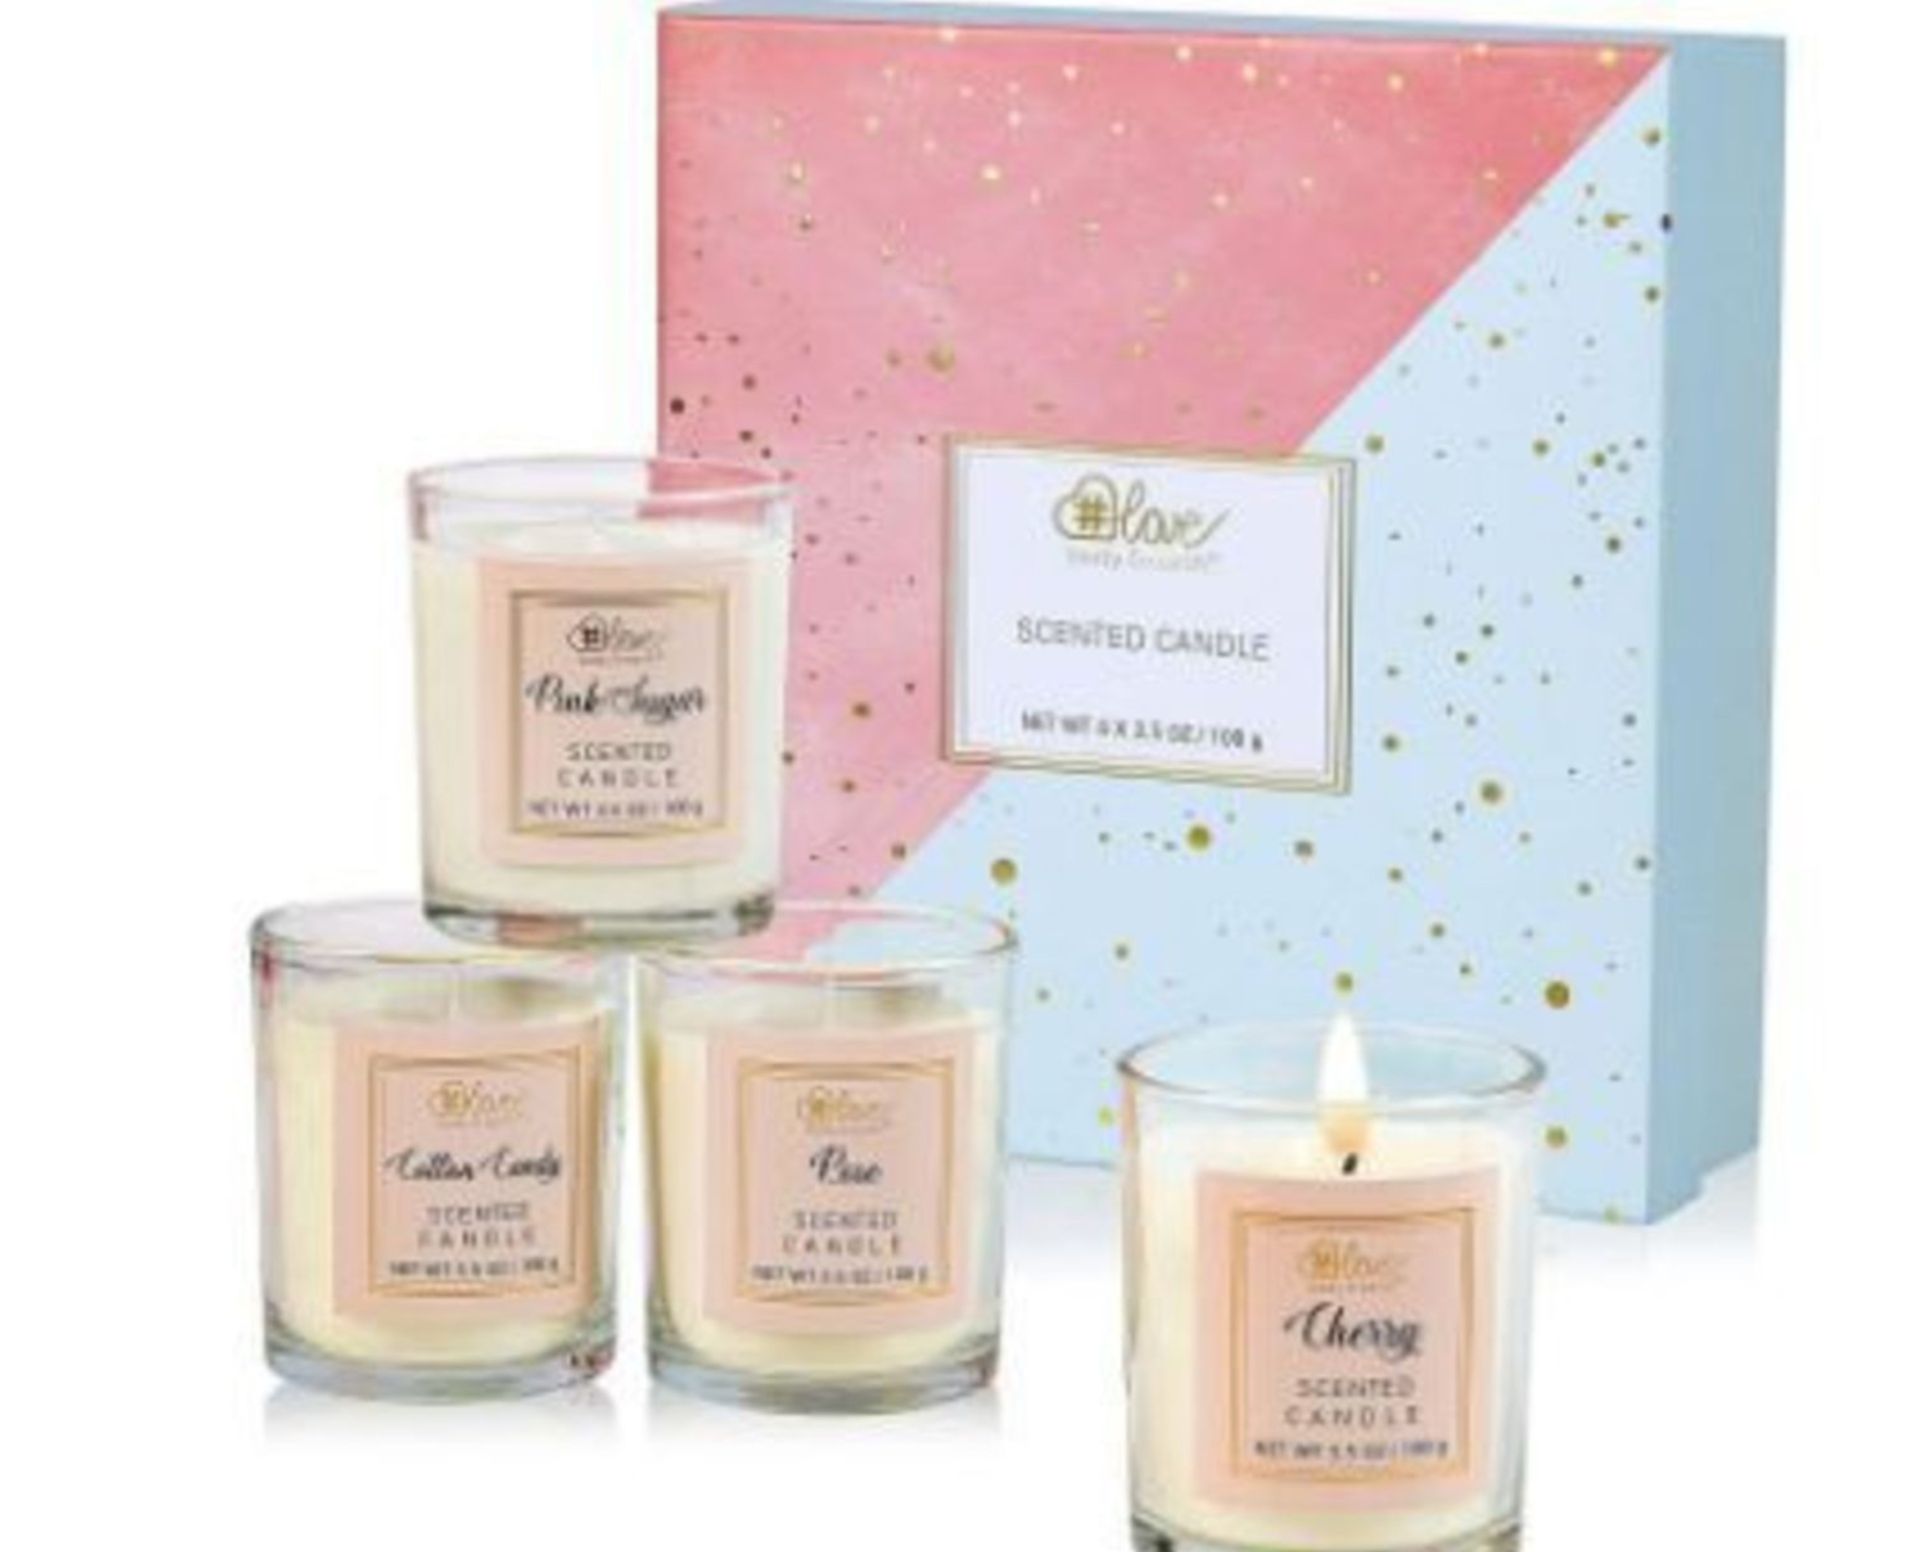 NEW BOXED Sets of 4 #LOVE Scented Candles Gift Set. Includes: Pink Sugar, Cotton Candy, Rose